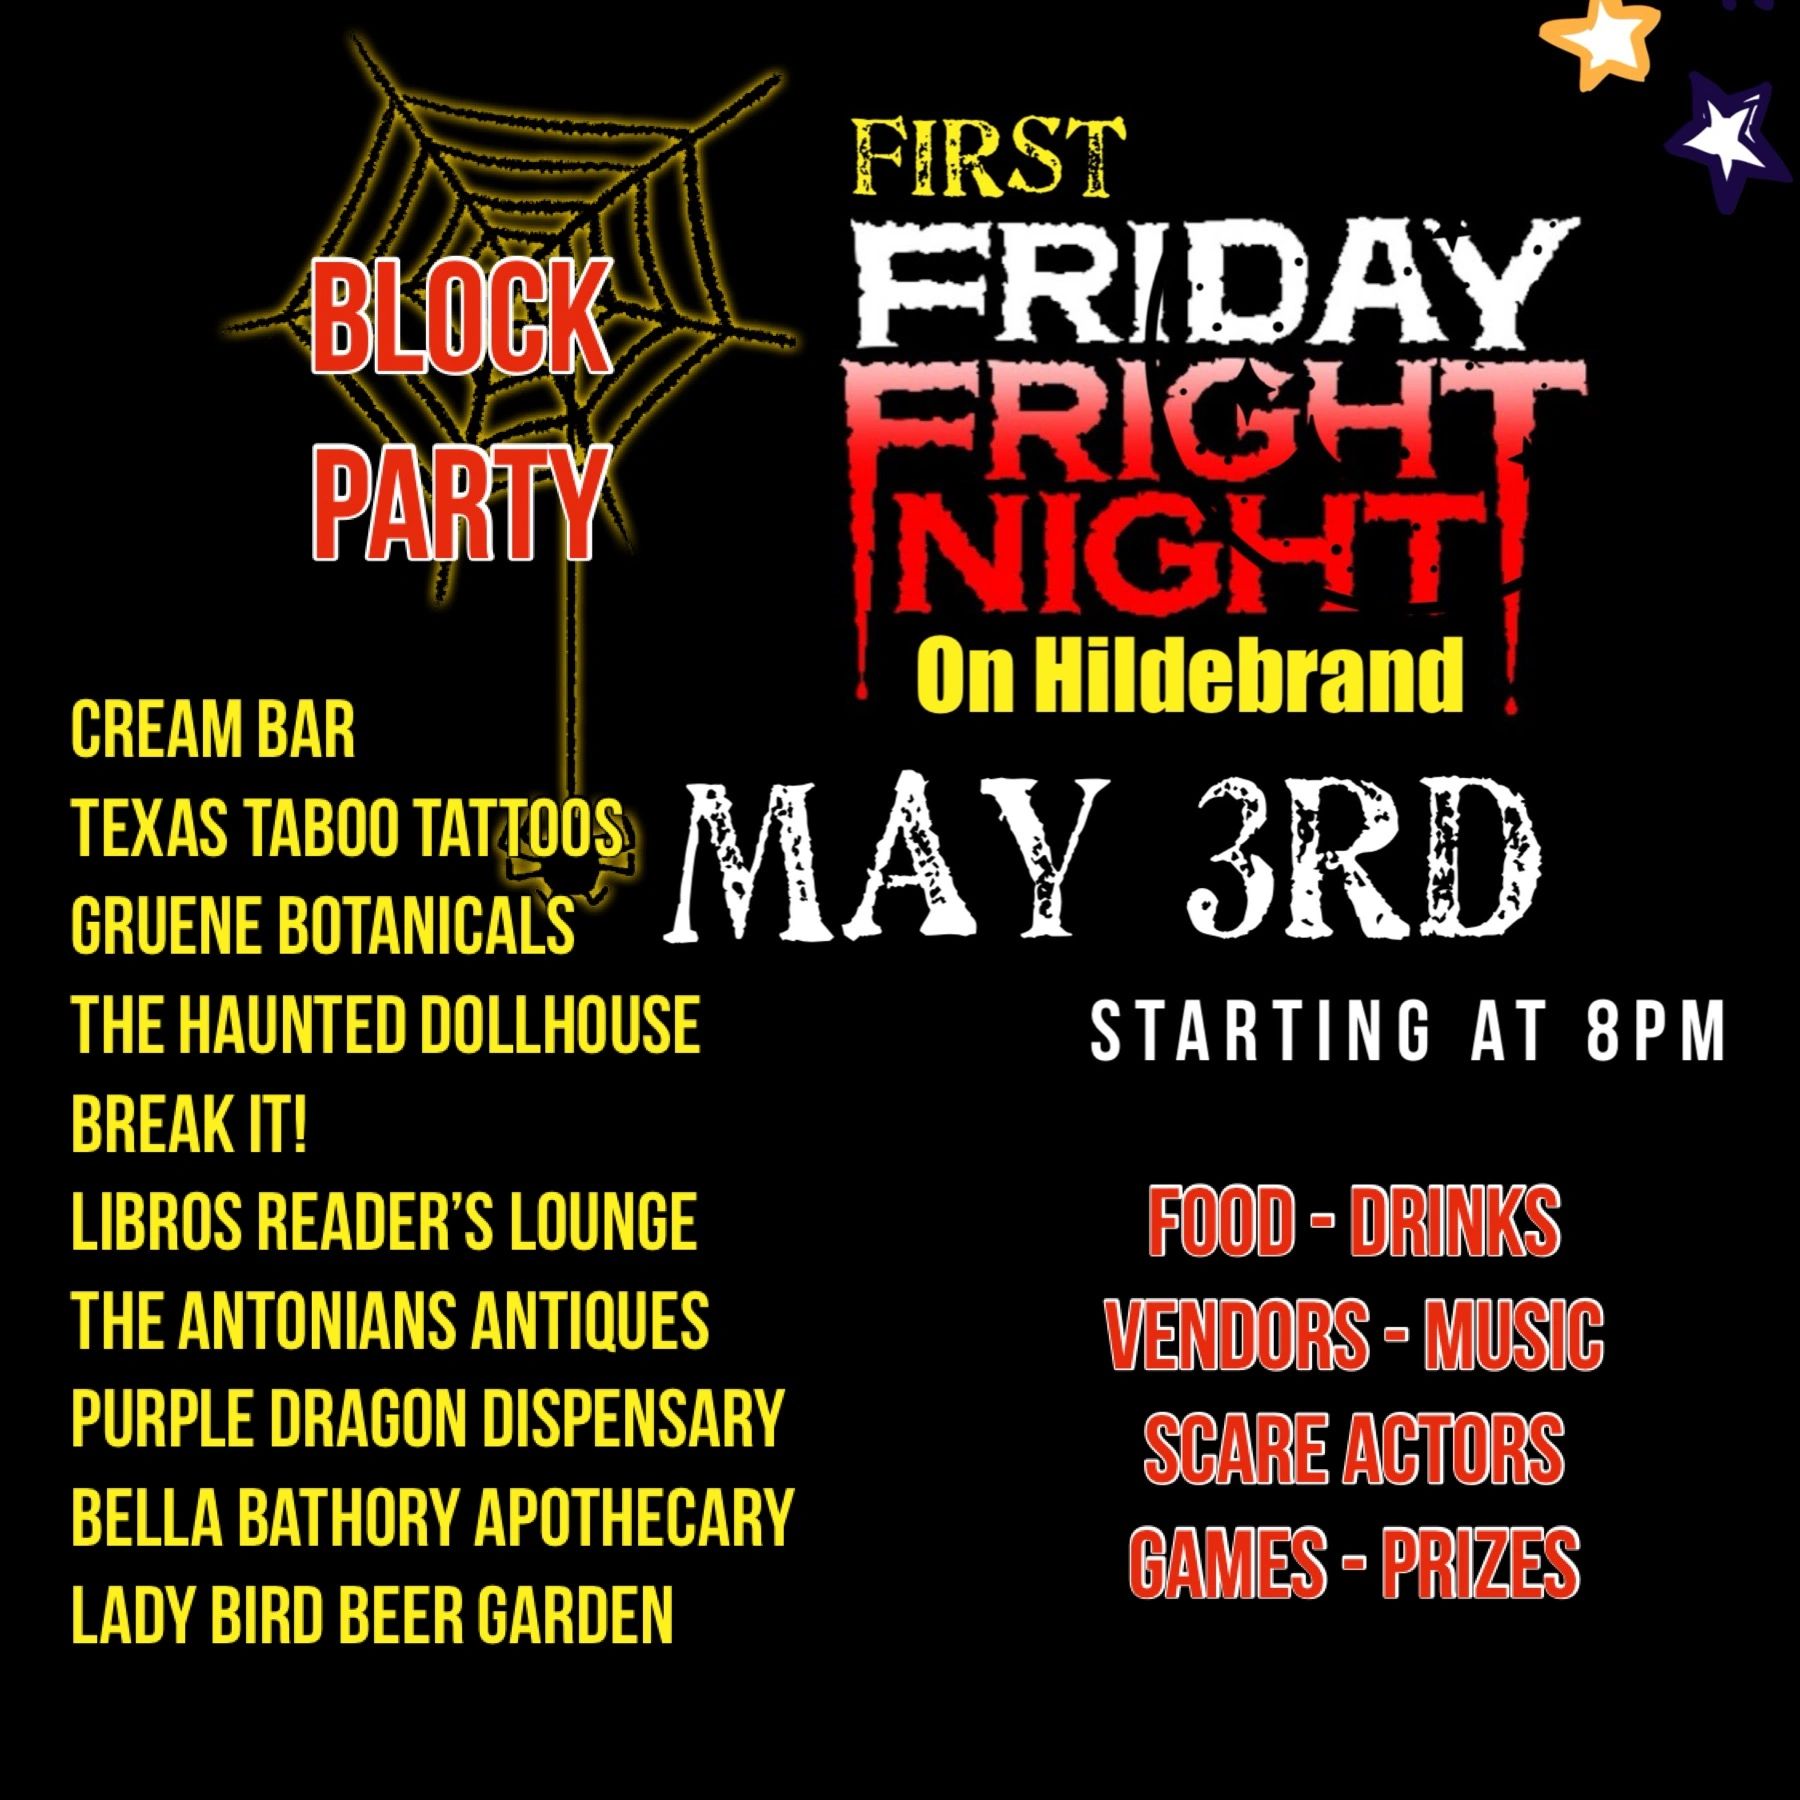 First Friday, Fright Friday, Haunted Dollhouse, bock party, family event, events in San Antonio